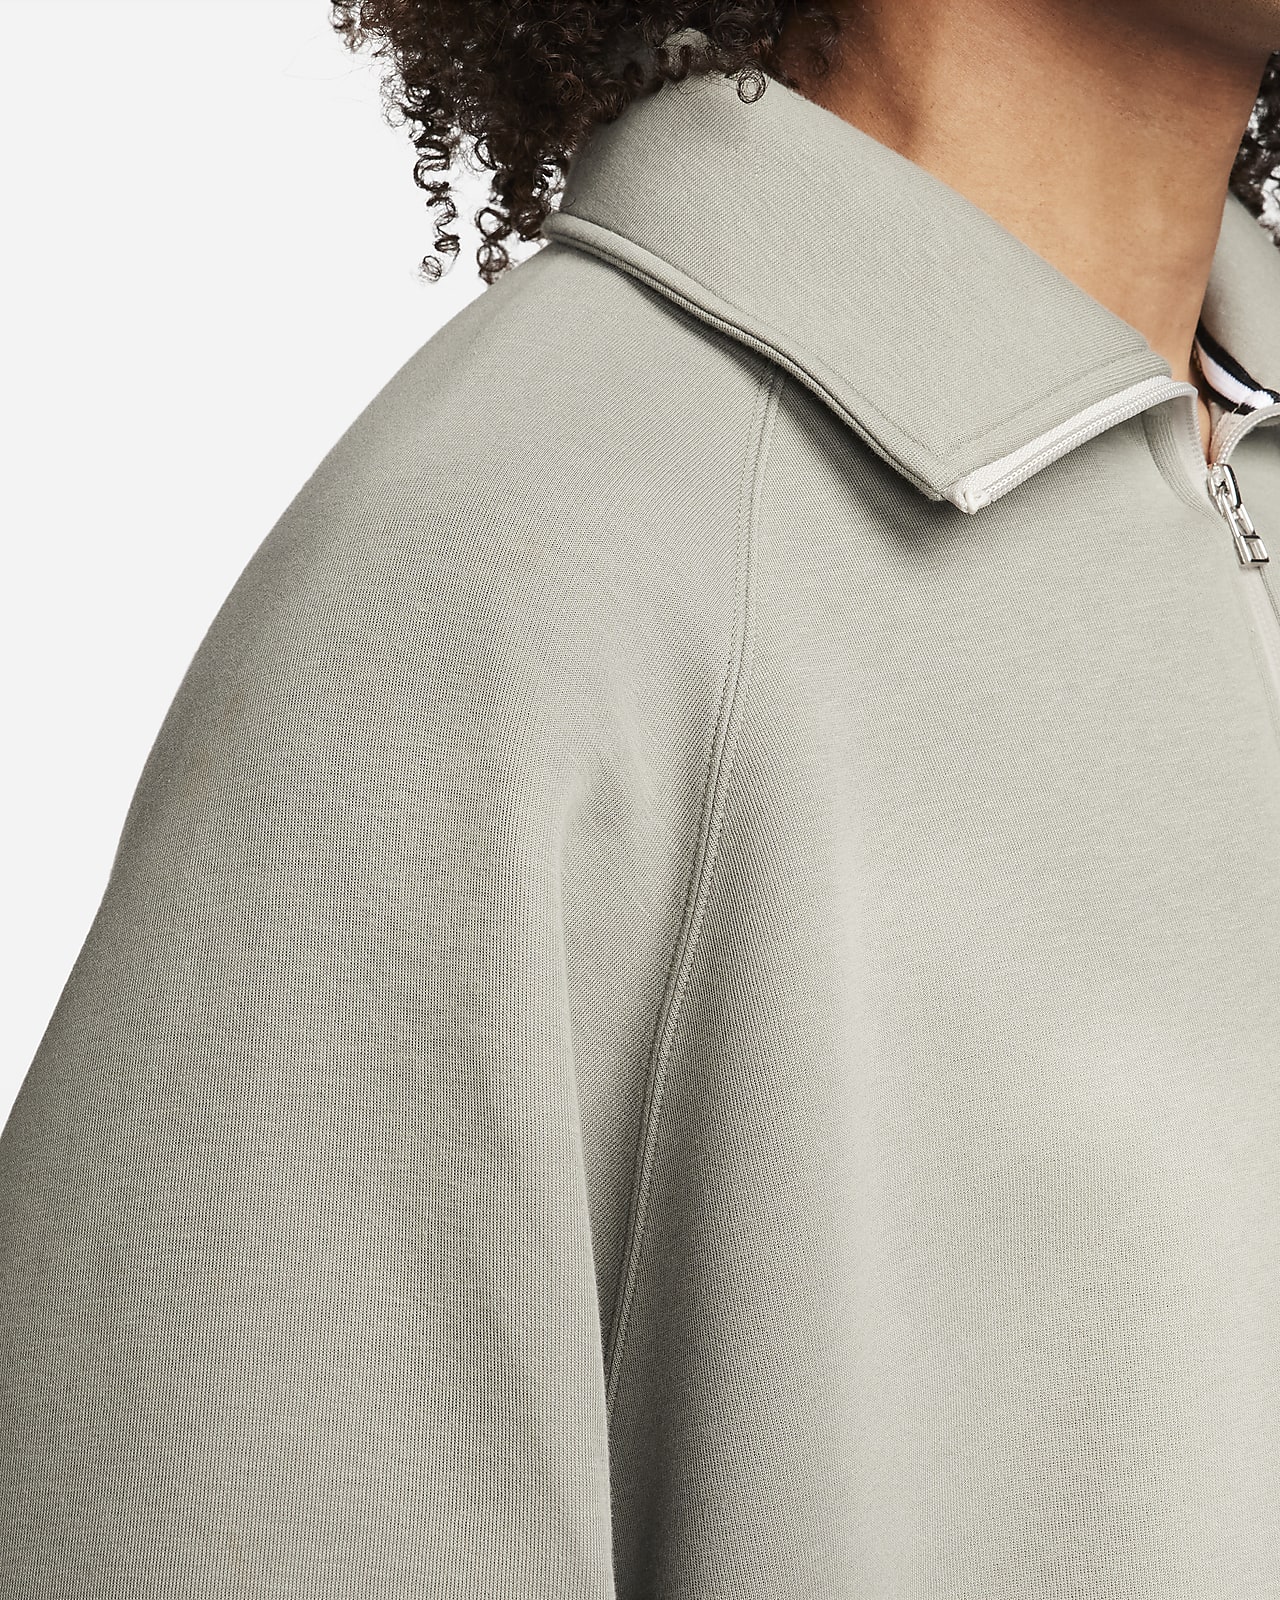 Nike Tech Fleece 10th Anniversary Reimagined Collection